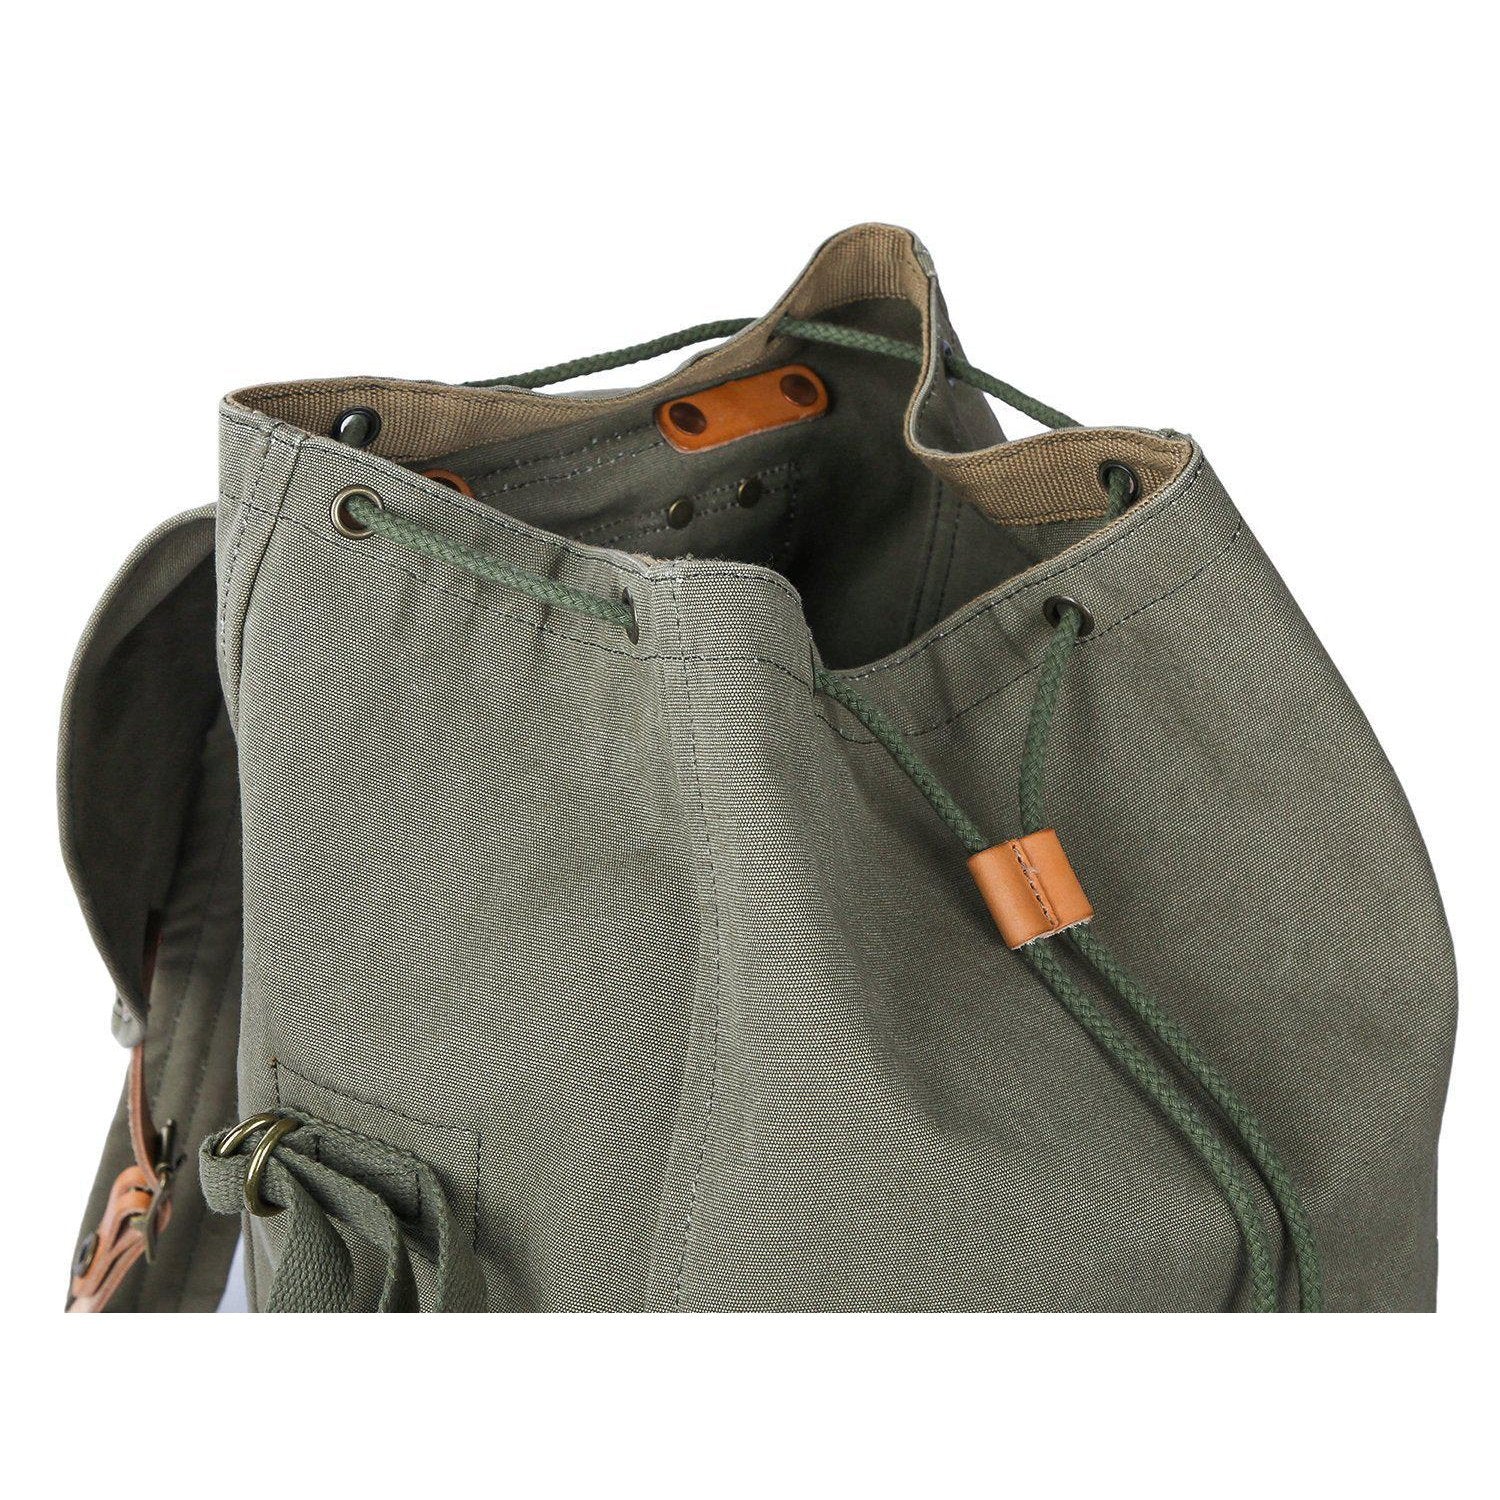 19-Inch Olive Drab Canvas Military Duffle Bag